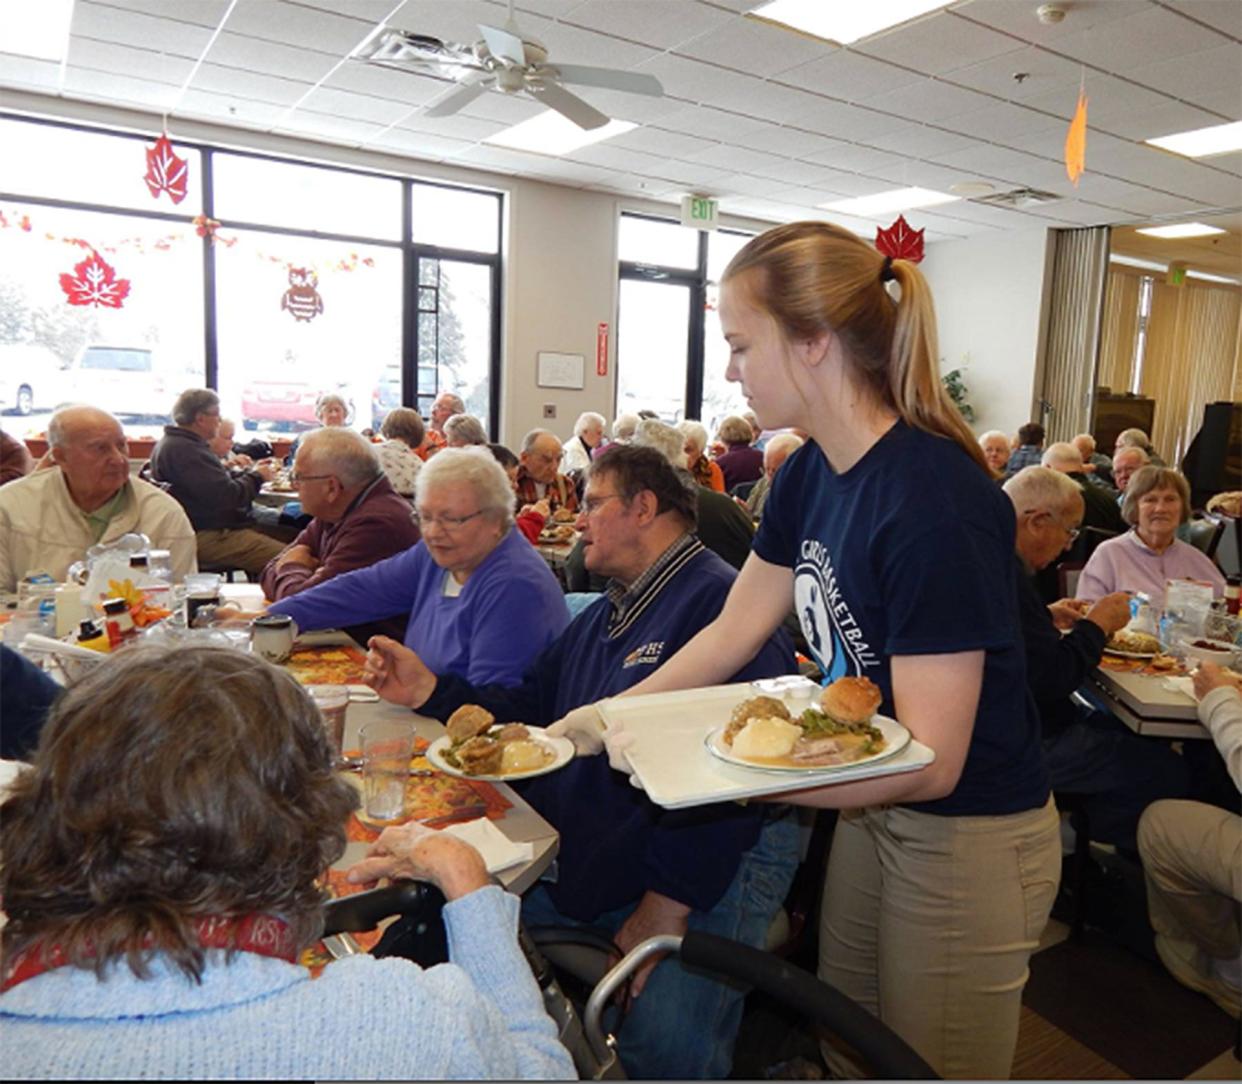 Pictured are seniors receiving and eating a meal at the Friendship Centers of Emmet County Council on Aging.